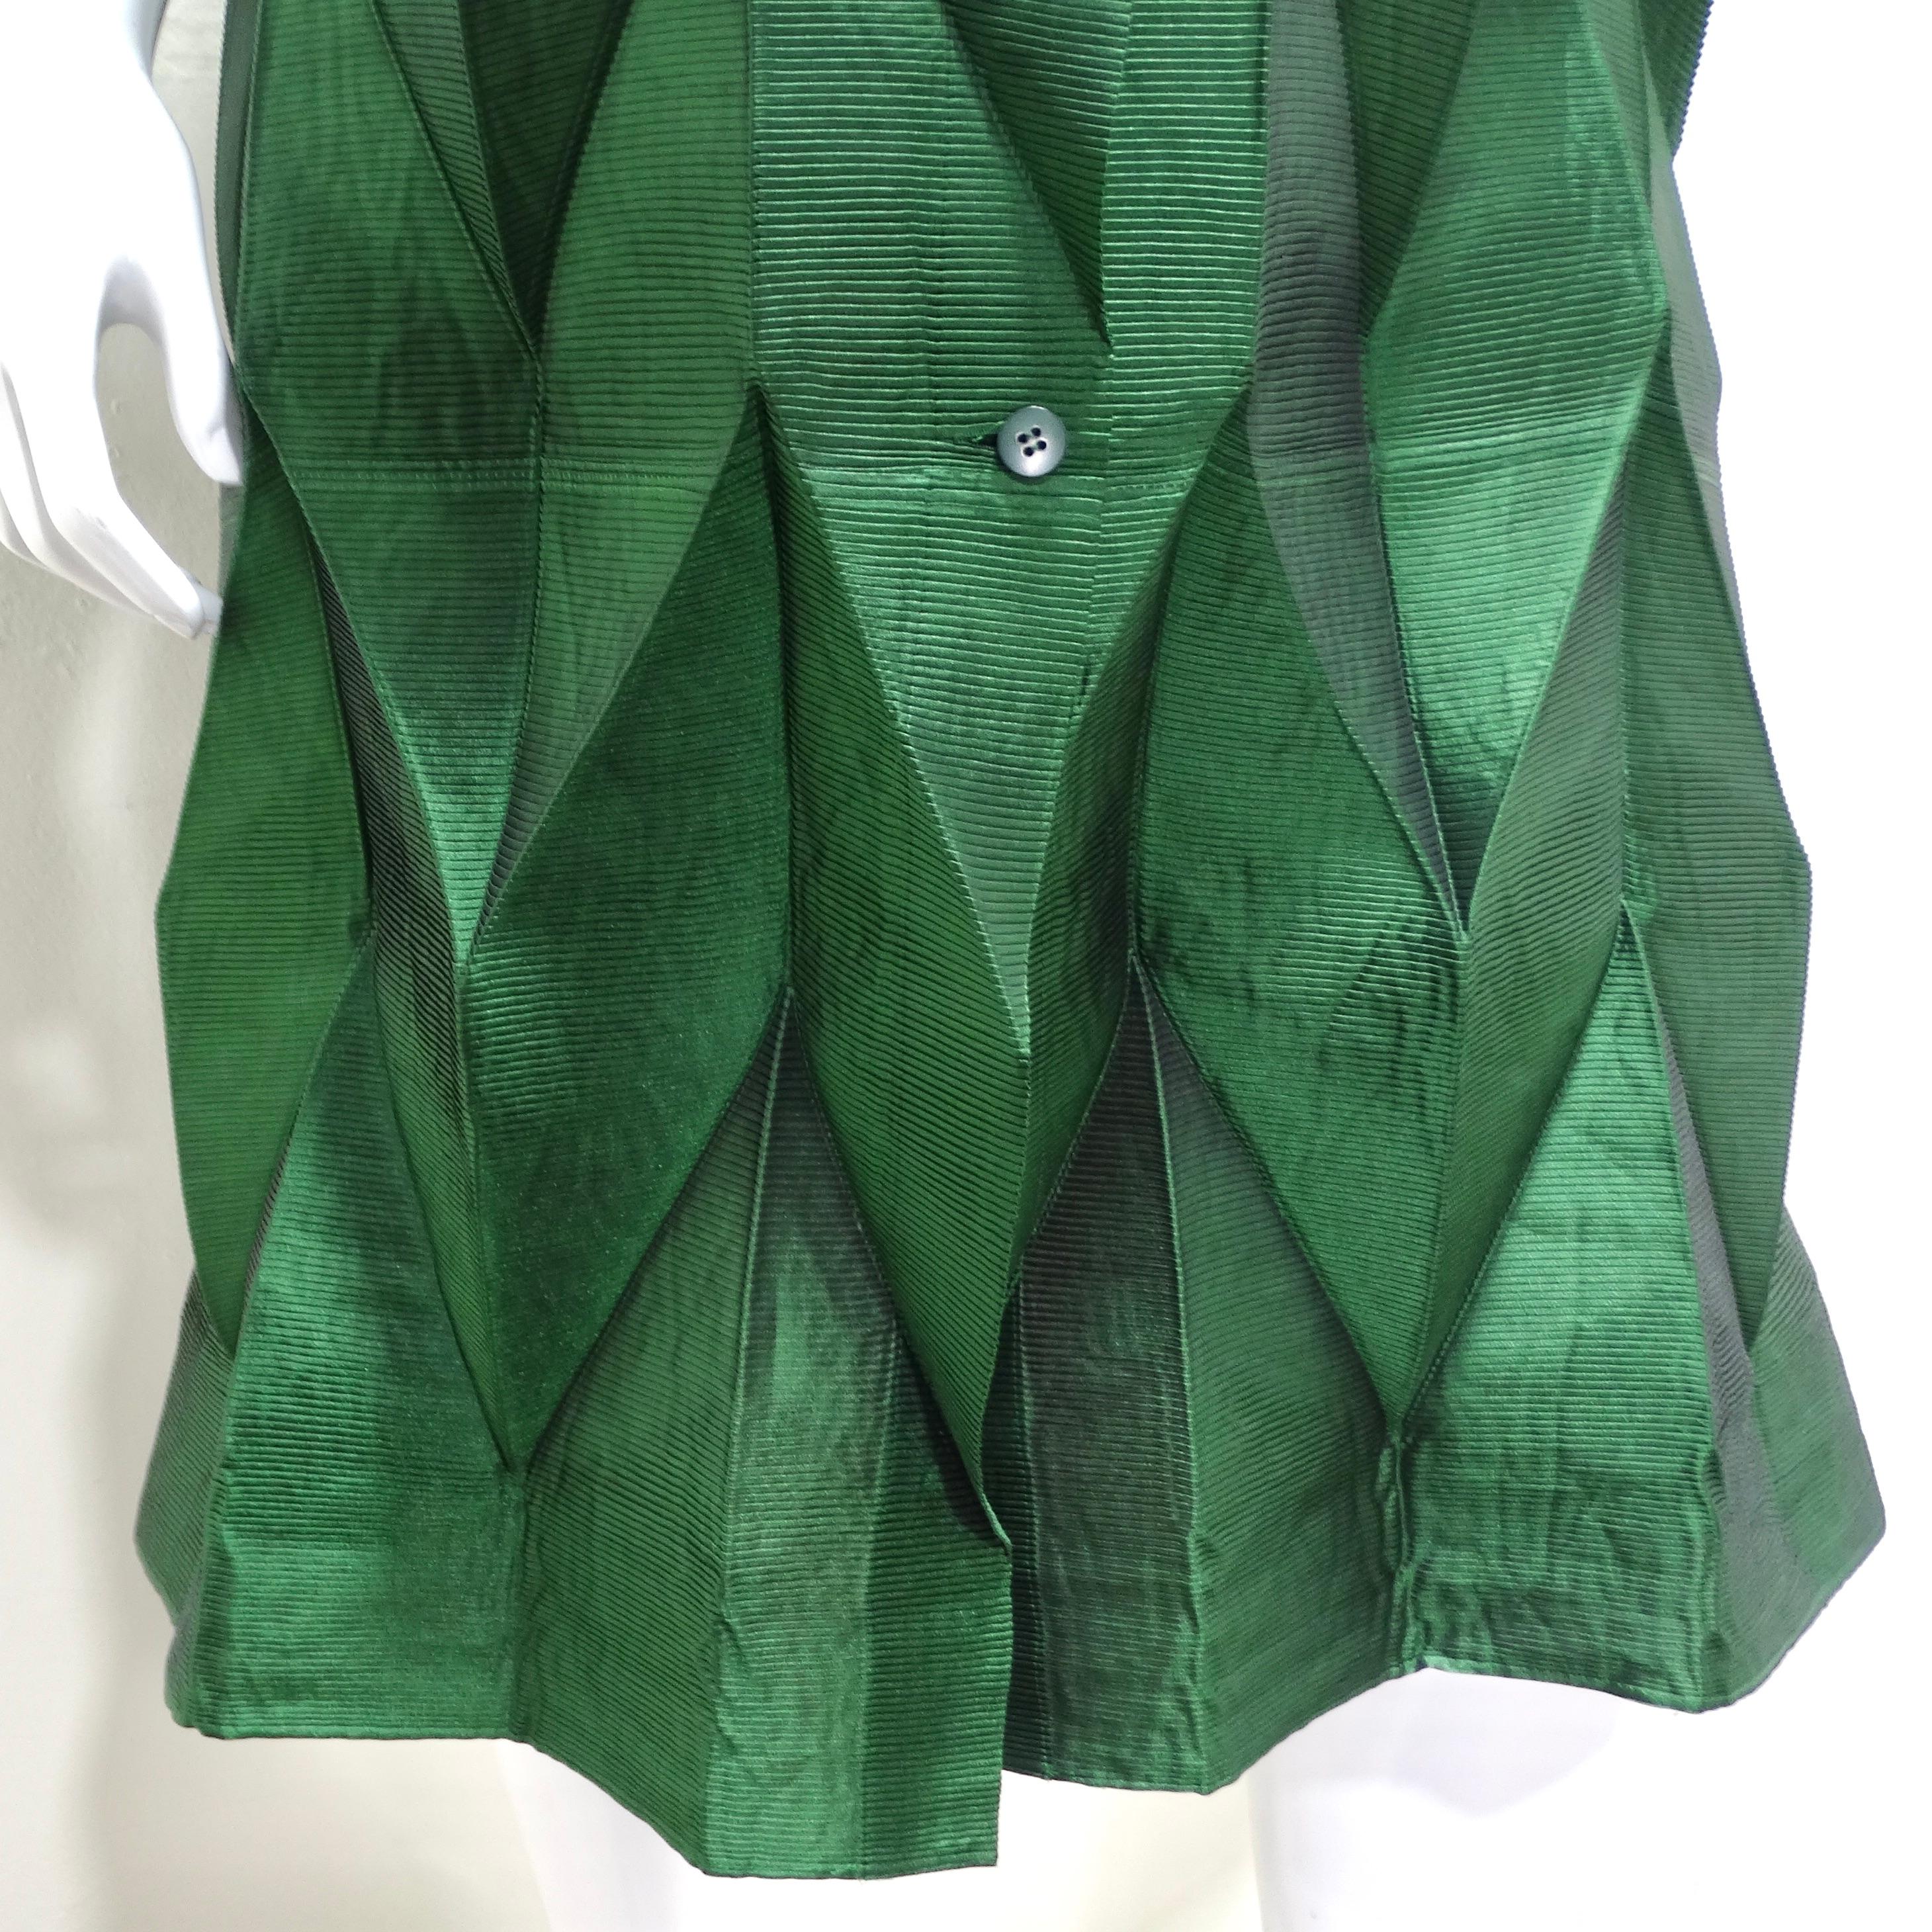 Women's or Men's Issey Miyake Spring 2008 Runway Green Pleated Dress For Sale